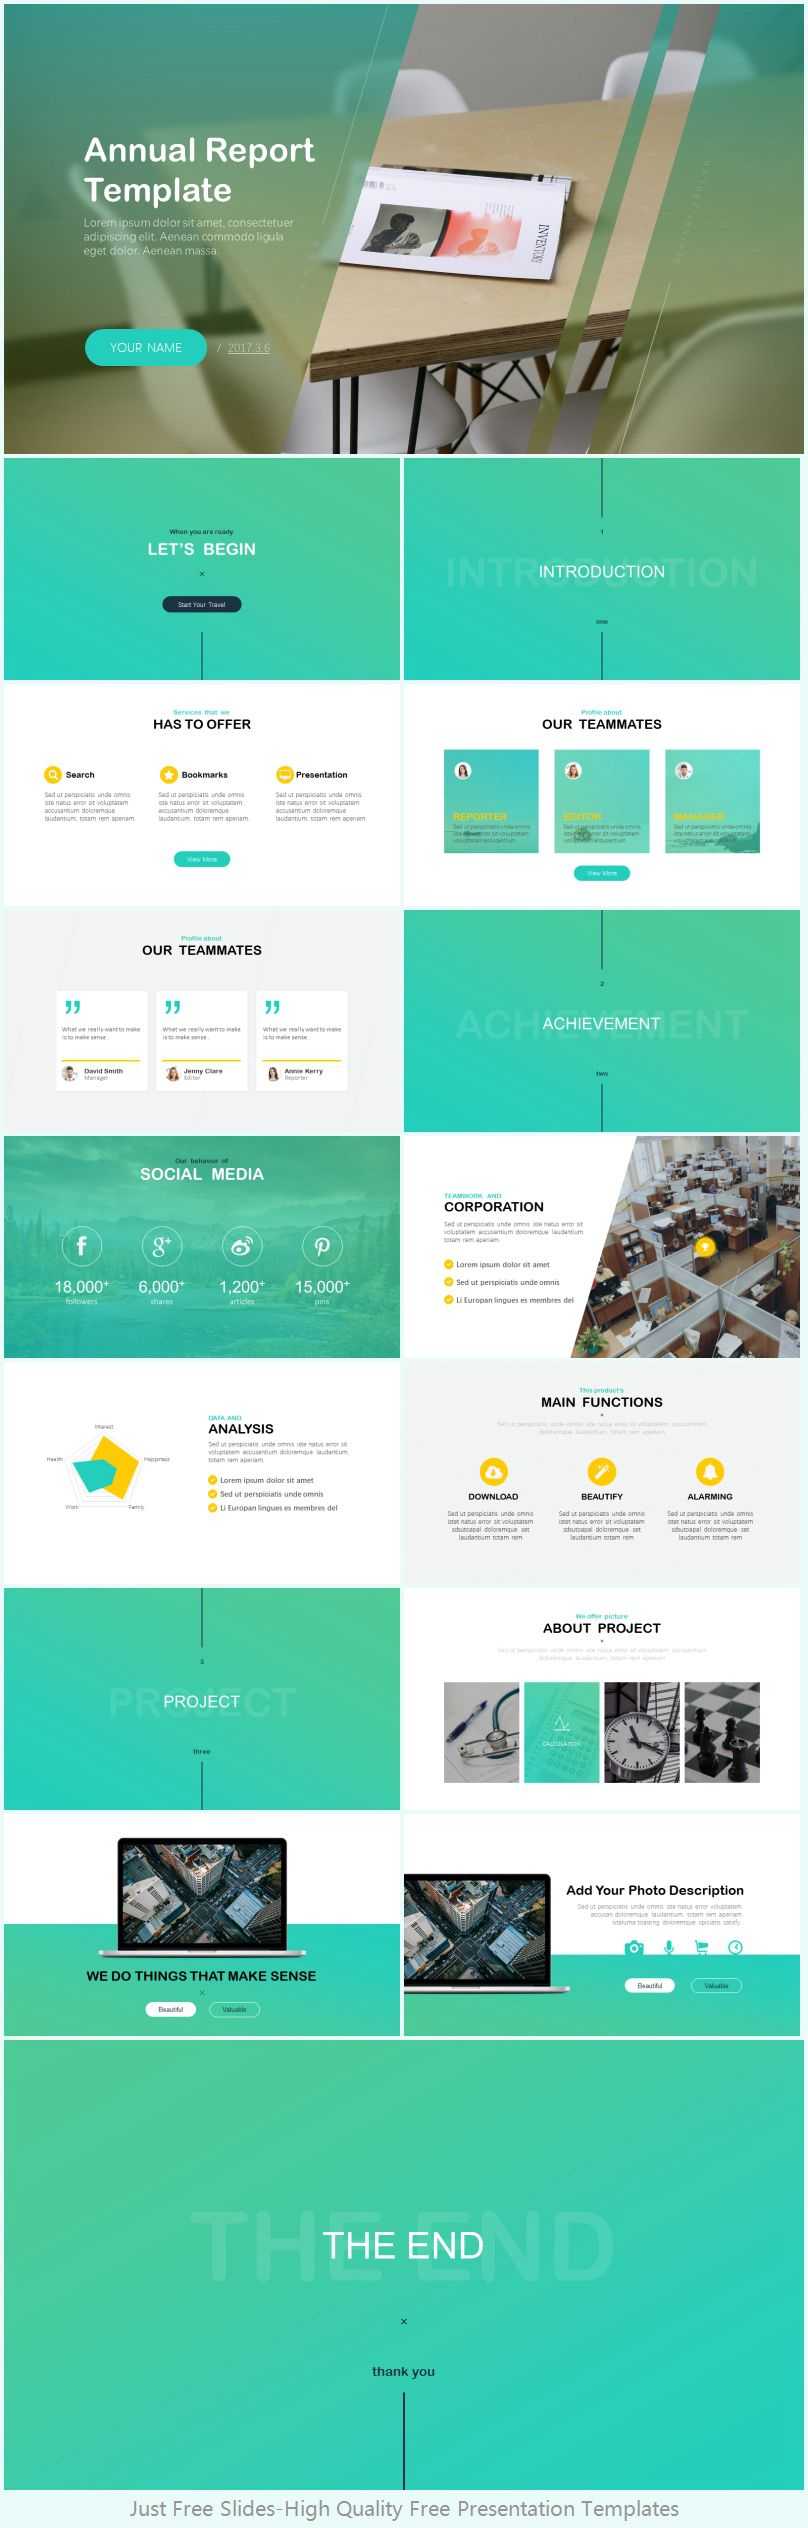 Annual Report Powerpoint Template – Just Free Slides Within Annual Report Ppt Template